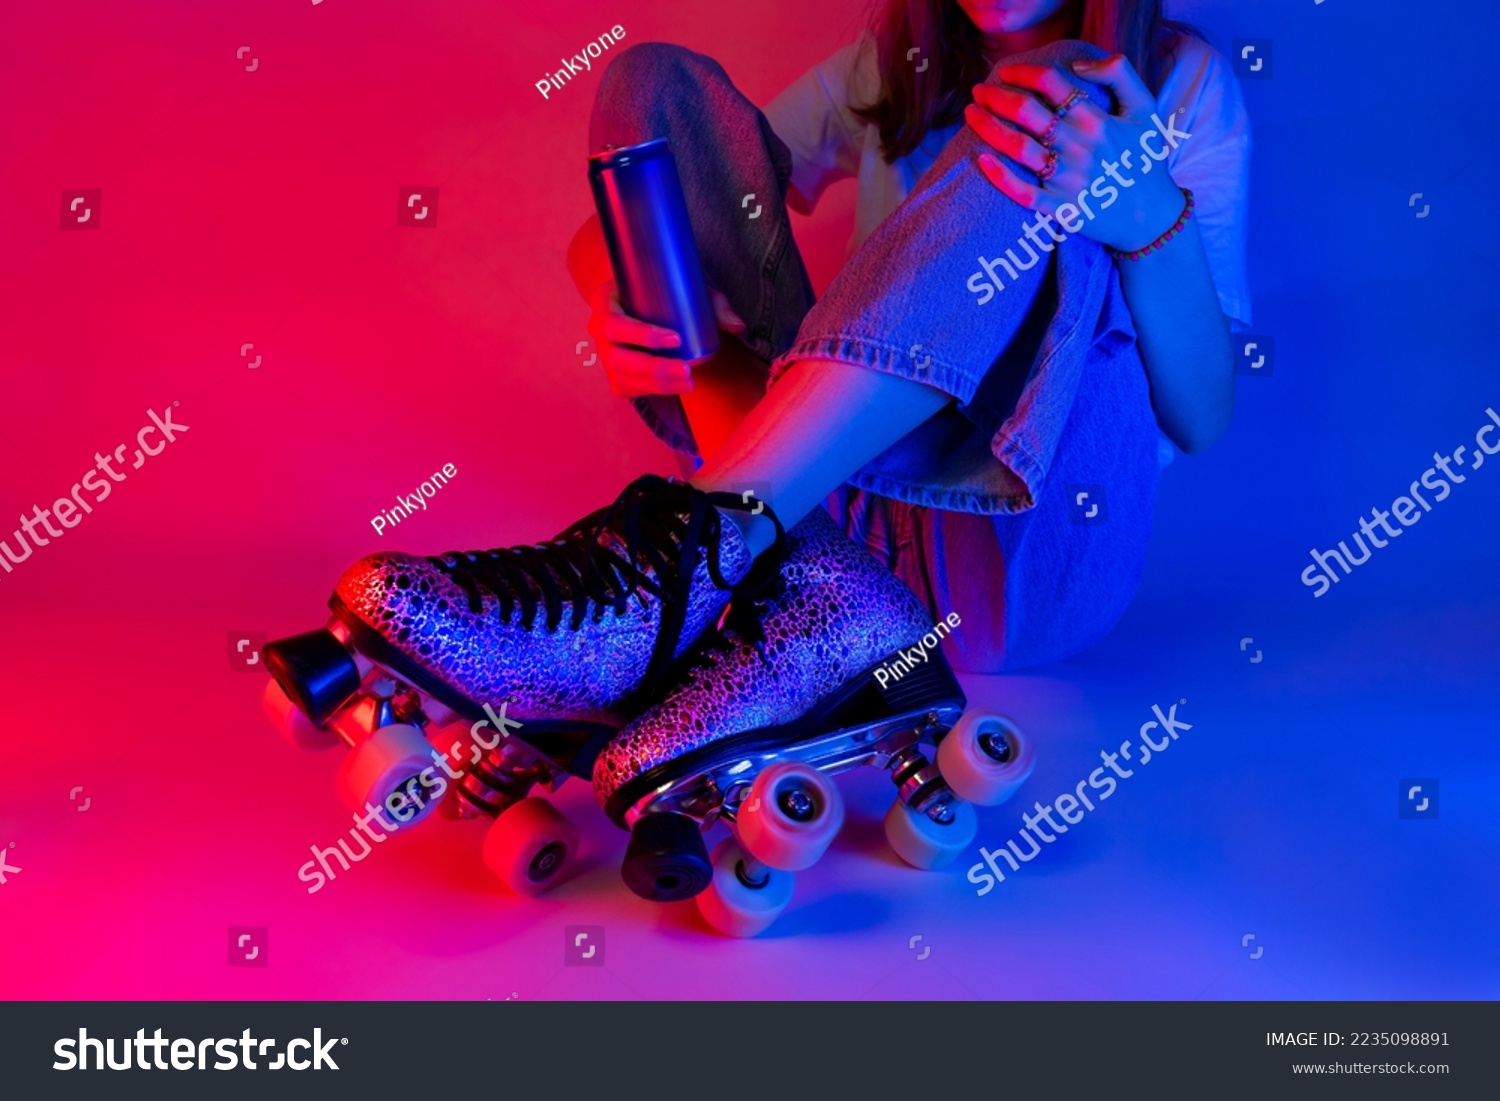 Roller skater holding a soda drink in a can during rest. Skating - sports and recreation. Saturated pink and blue, pop art style poster. #2235098891